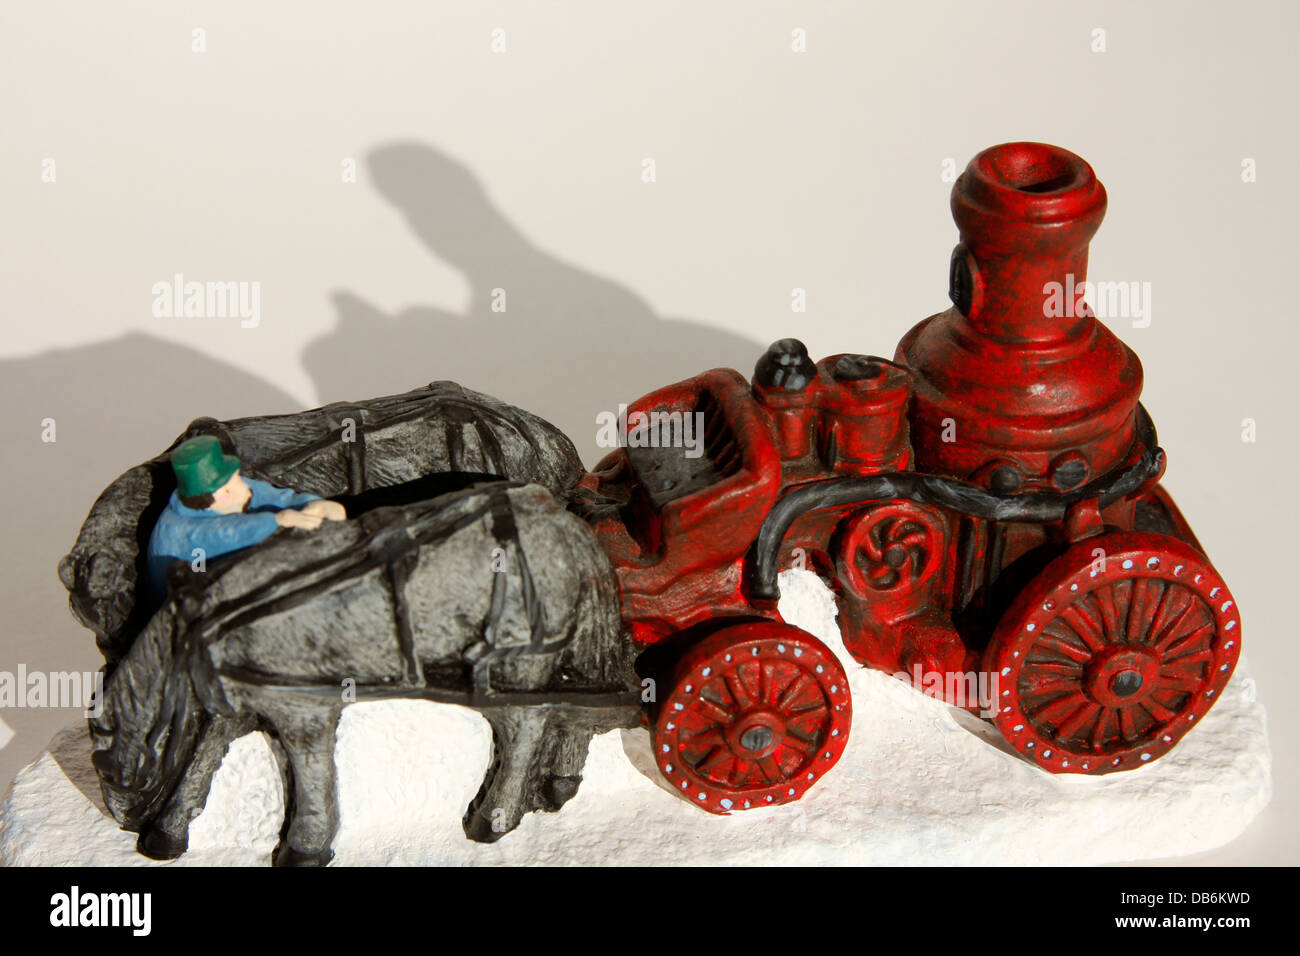 Ceramic figurine of an antique steam fire engine horse drawn wagon on white background Stock Photo